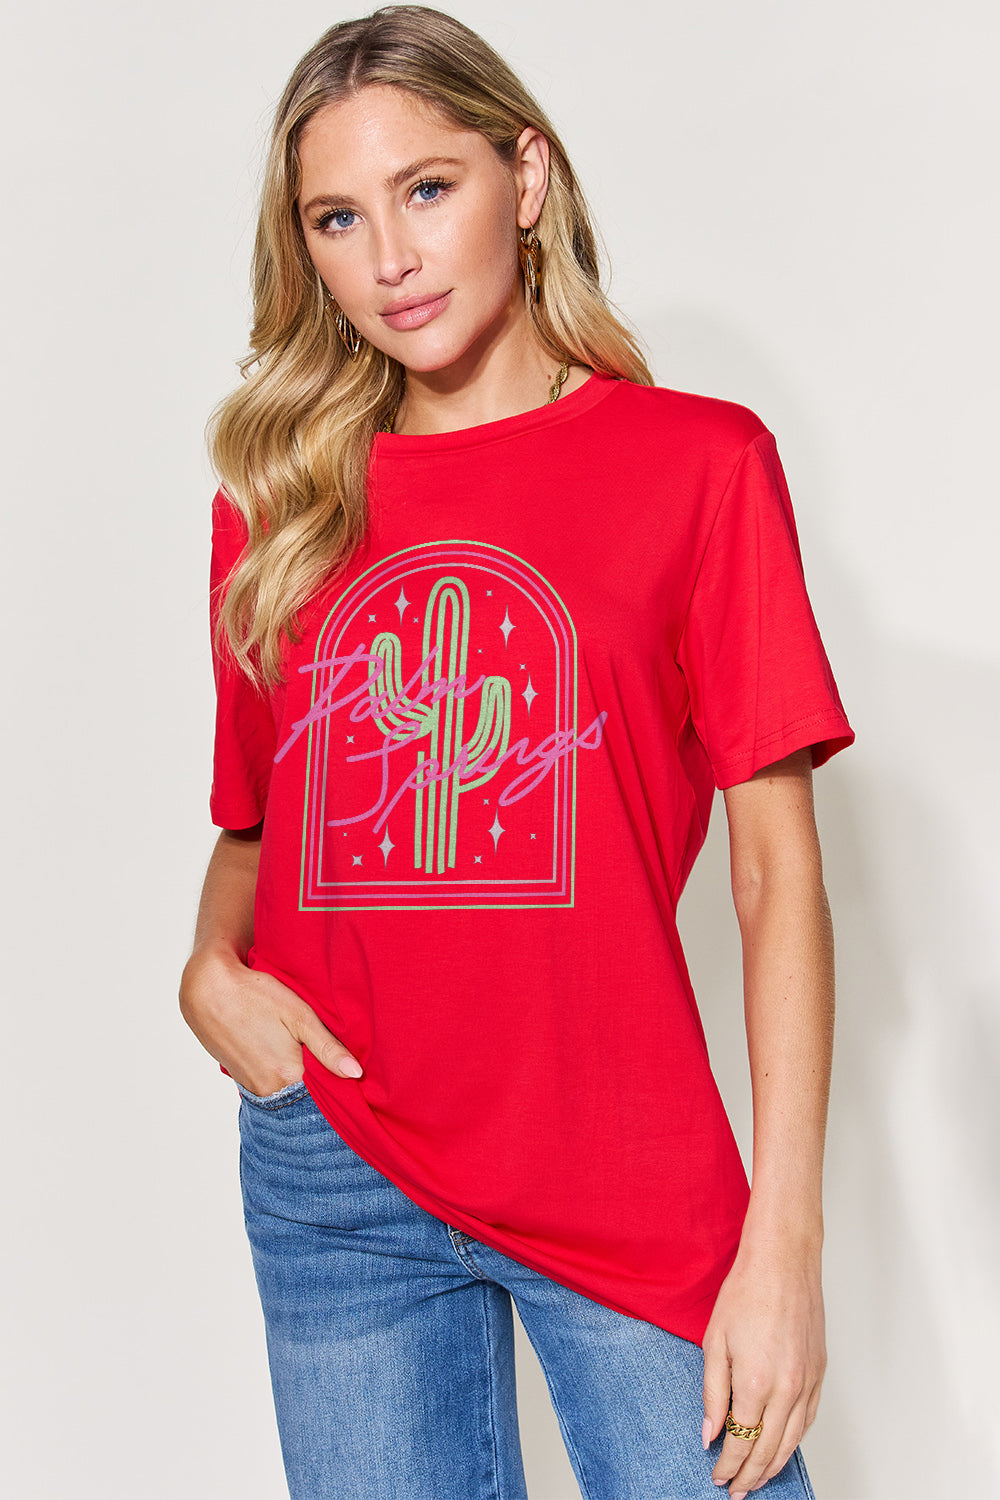 Simply Love Palm Springs Full Size Graphic T-Shirt